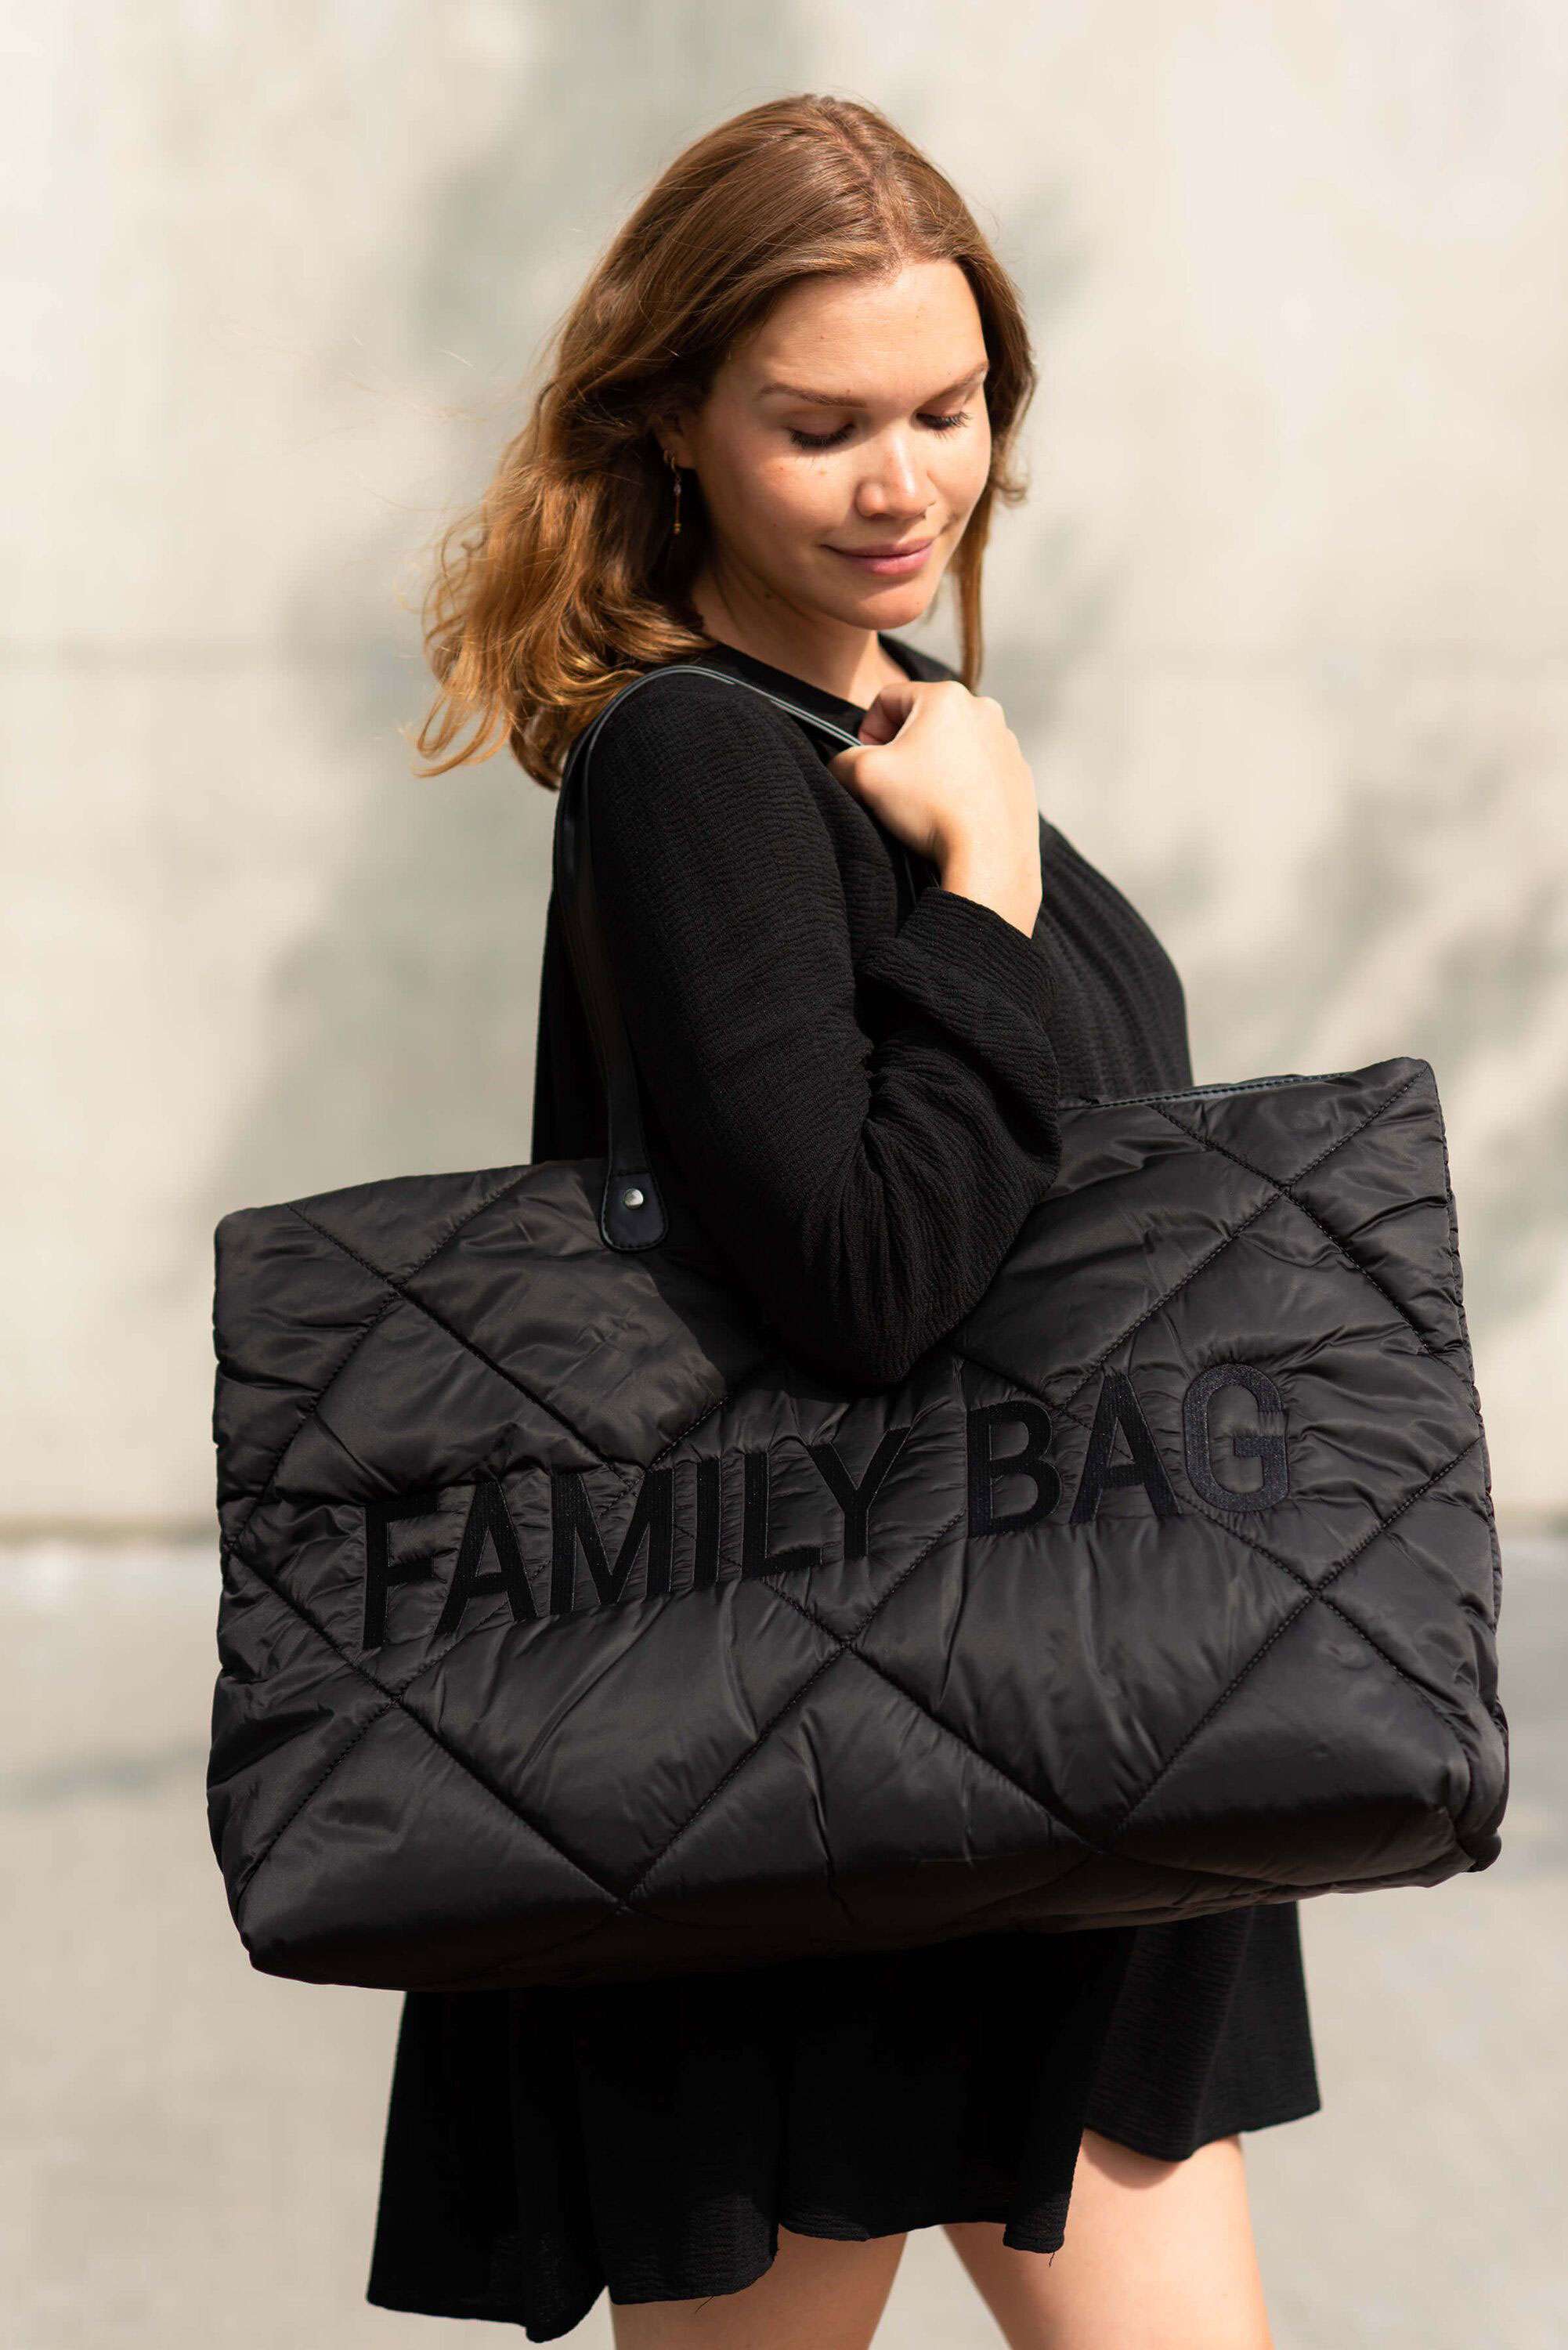 Family Bag Quilted Puffered Black - ChildHome